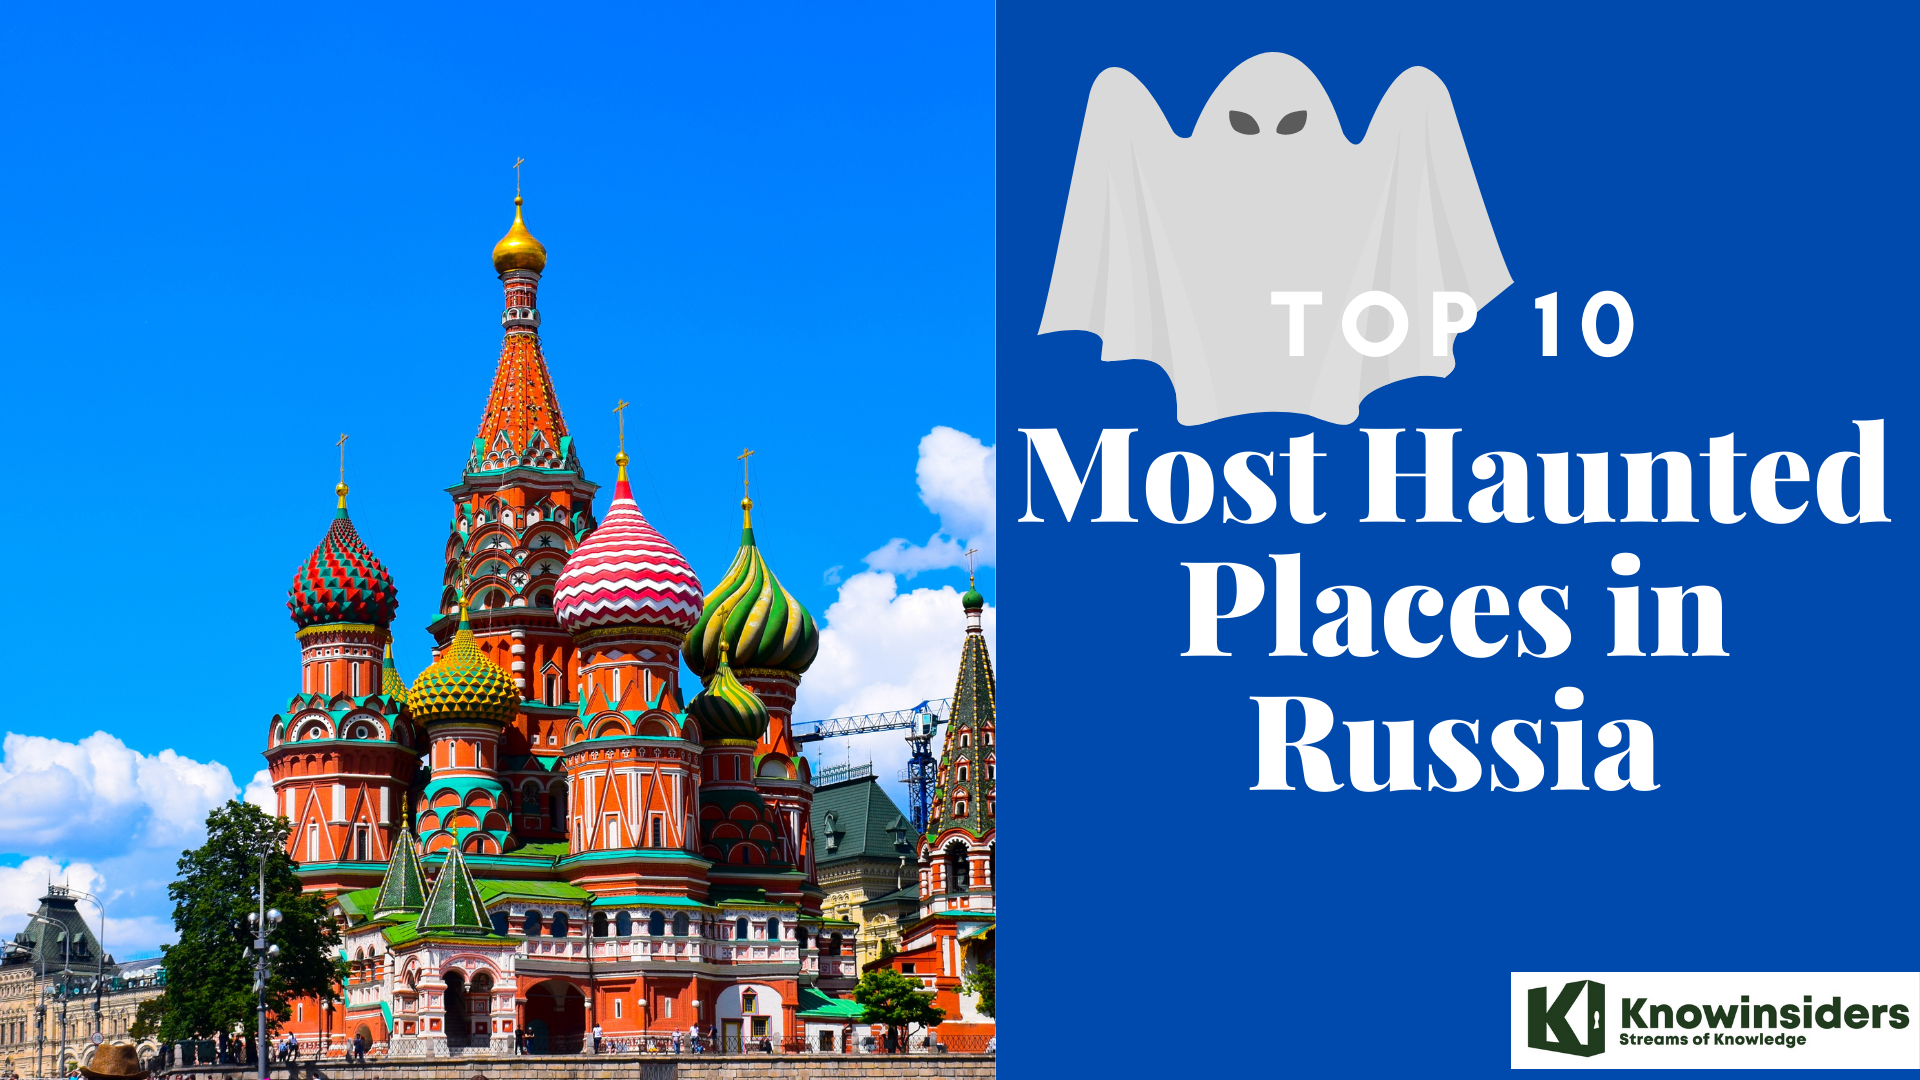 Top 10 Most Haunted & Ghostly Destinations in Russia